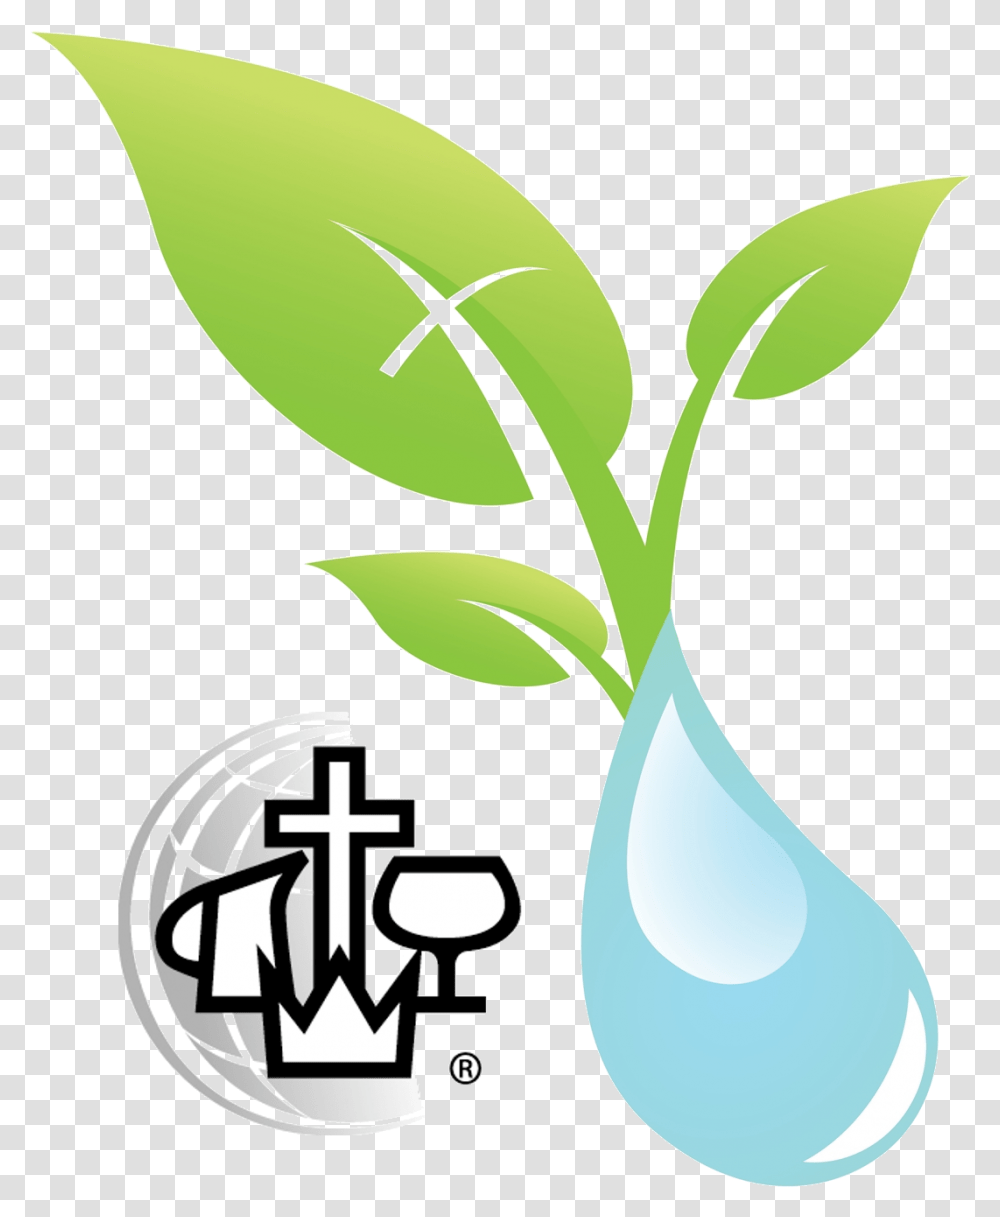 Living Water Church Christian And Missionary Alliance Logo, Plant, Vegetable, Food, Droplet Transparent Png